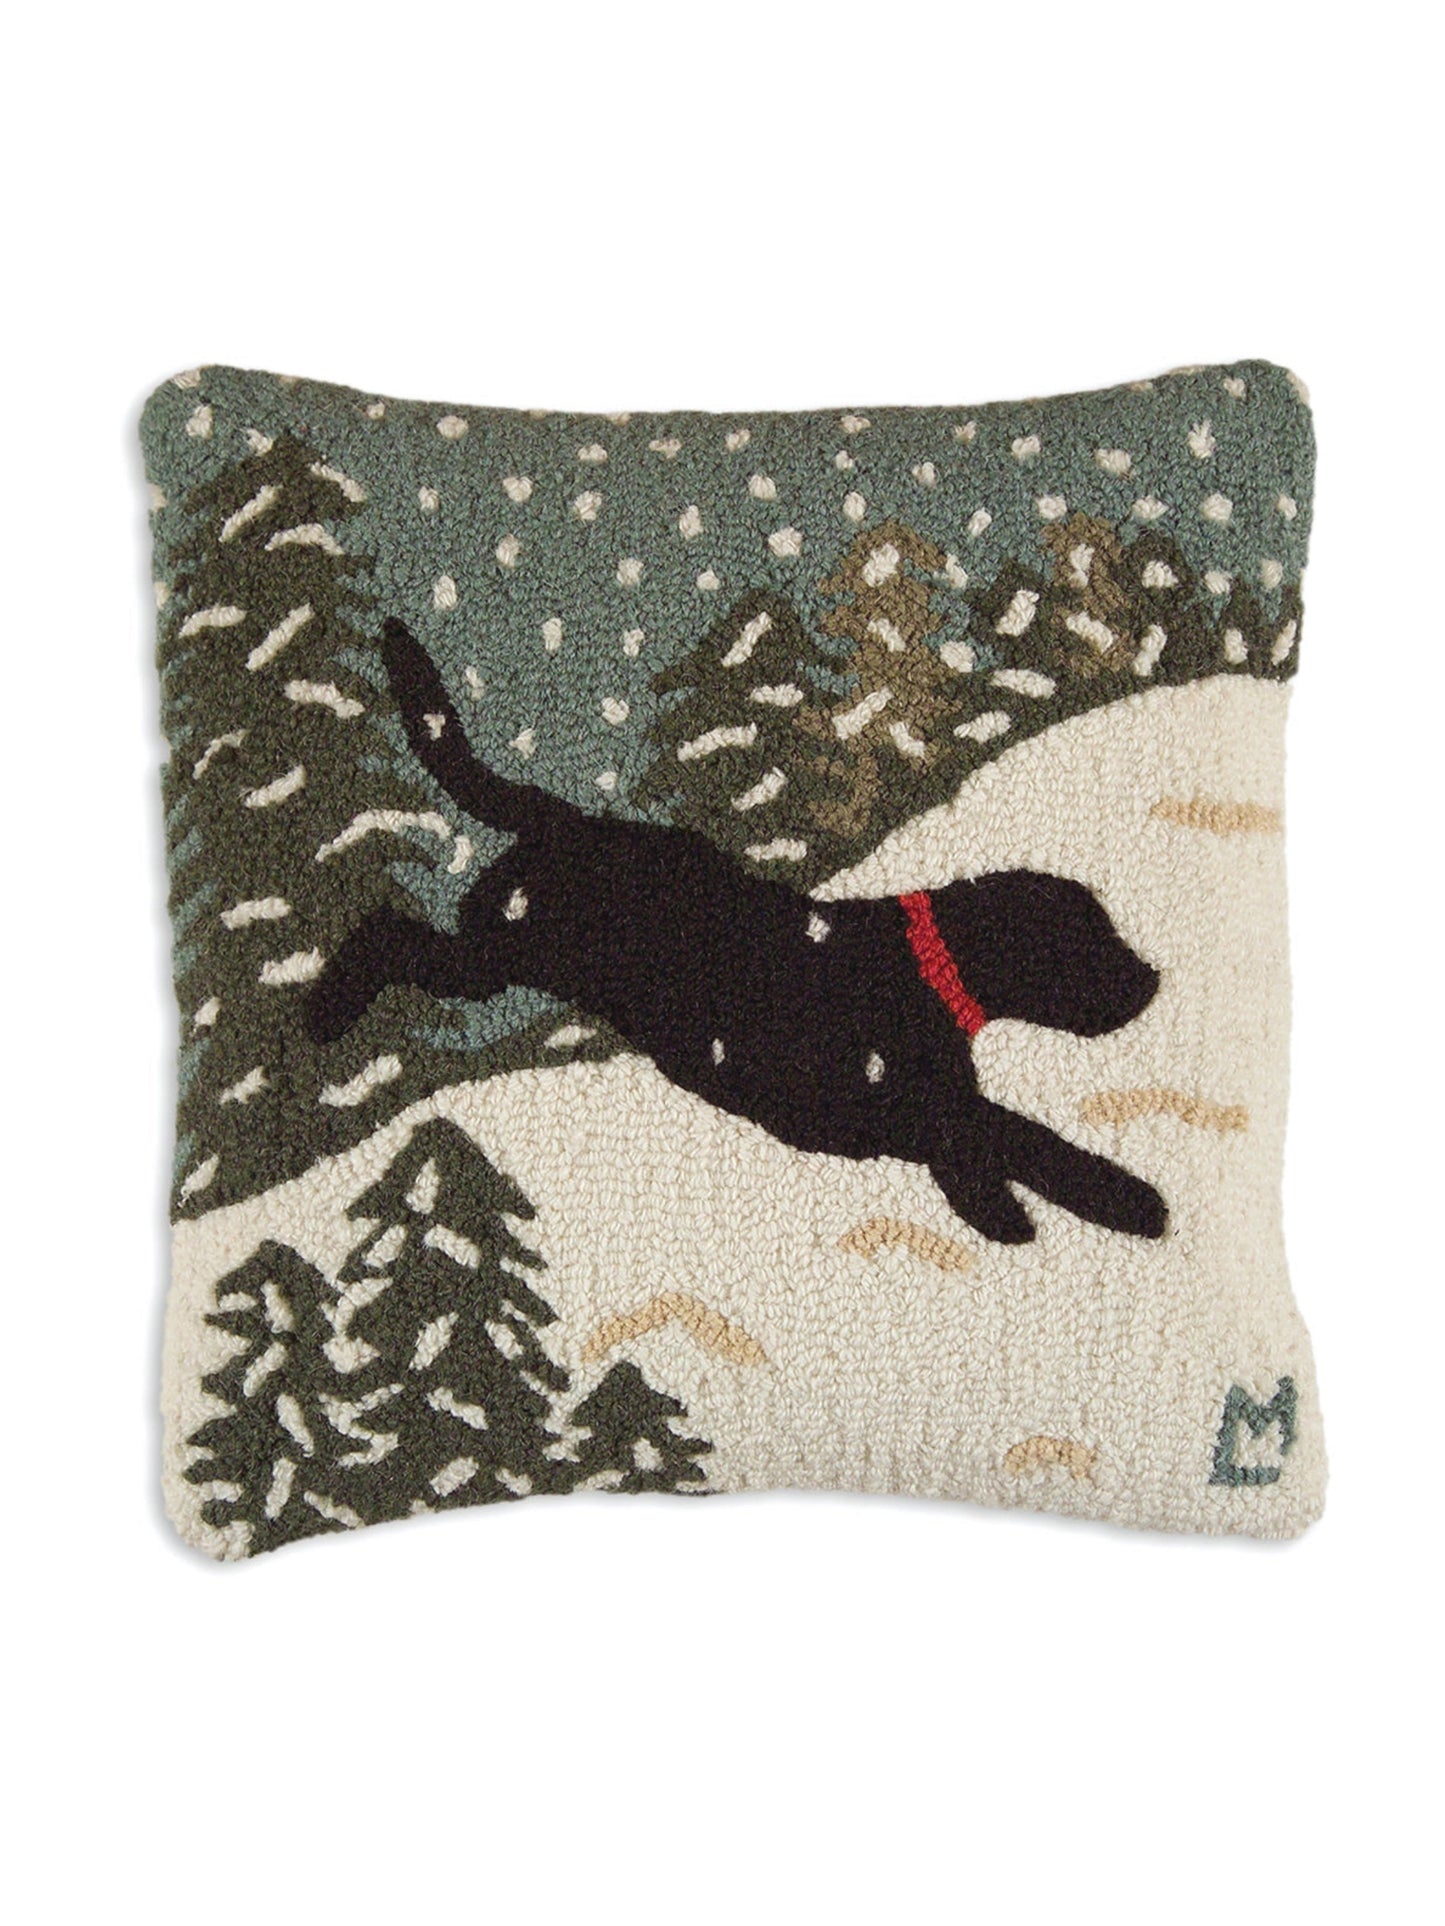 Black Lab Snow Dog Hooked Wool Pillow Weston Table